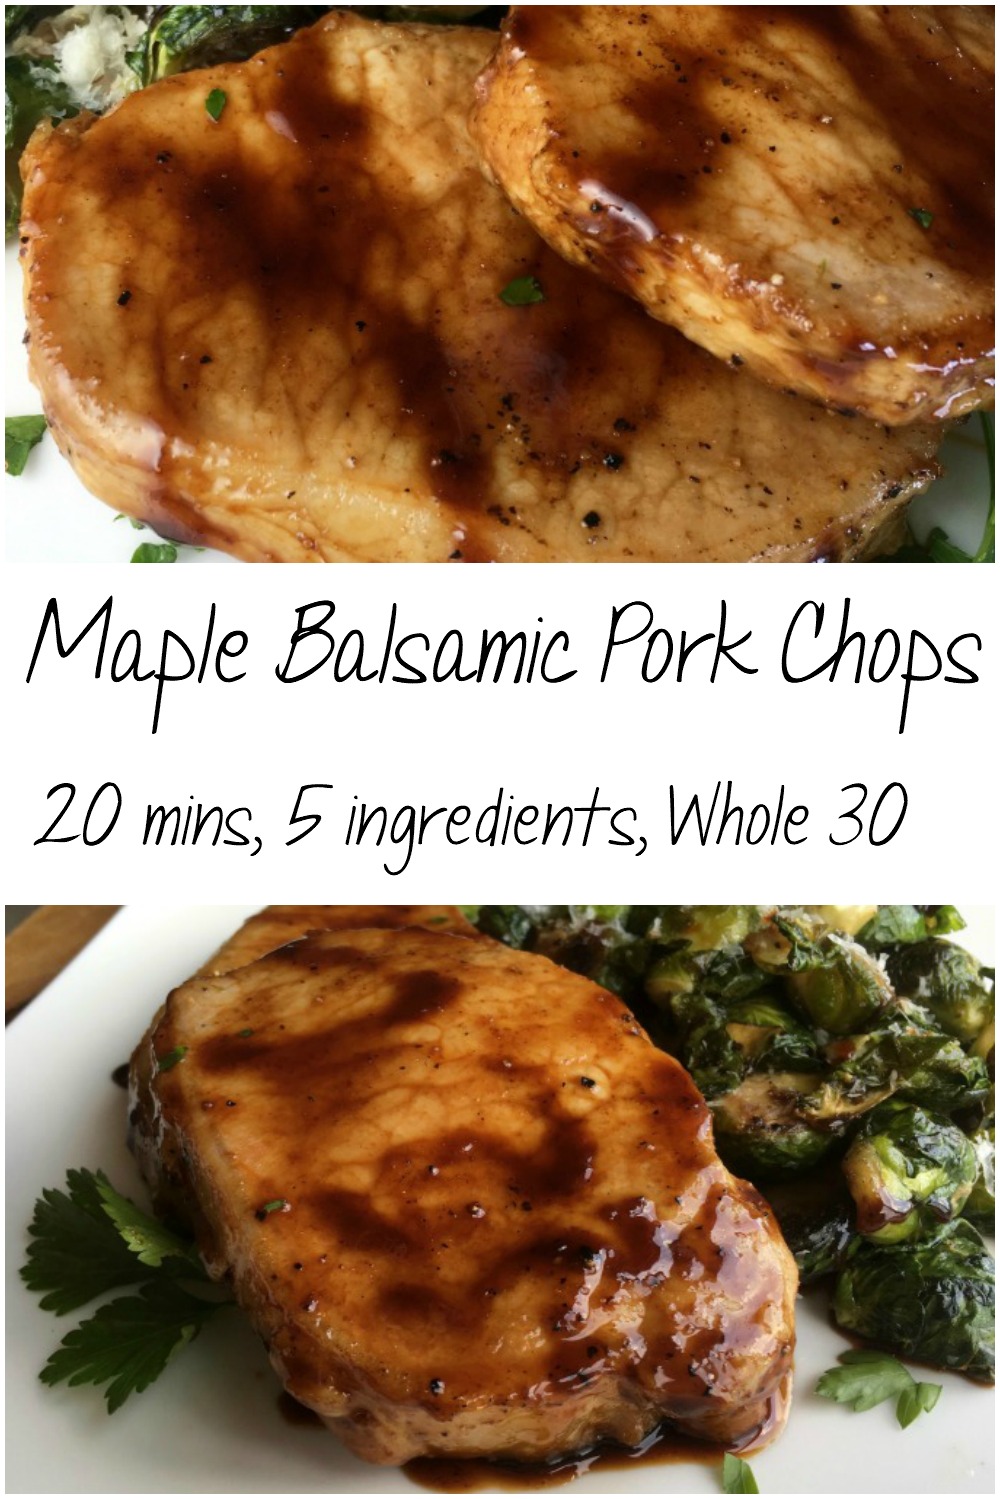 These Maple Balsamic Pork Chops are so easy to make, and taste so good! 20 minutes to make, 5 ingredients, and Whole 30 and Paleo approved. Gluten free, too! 